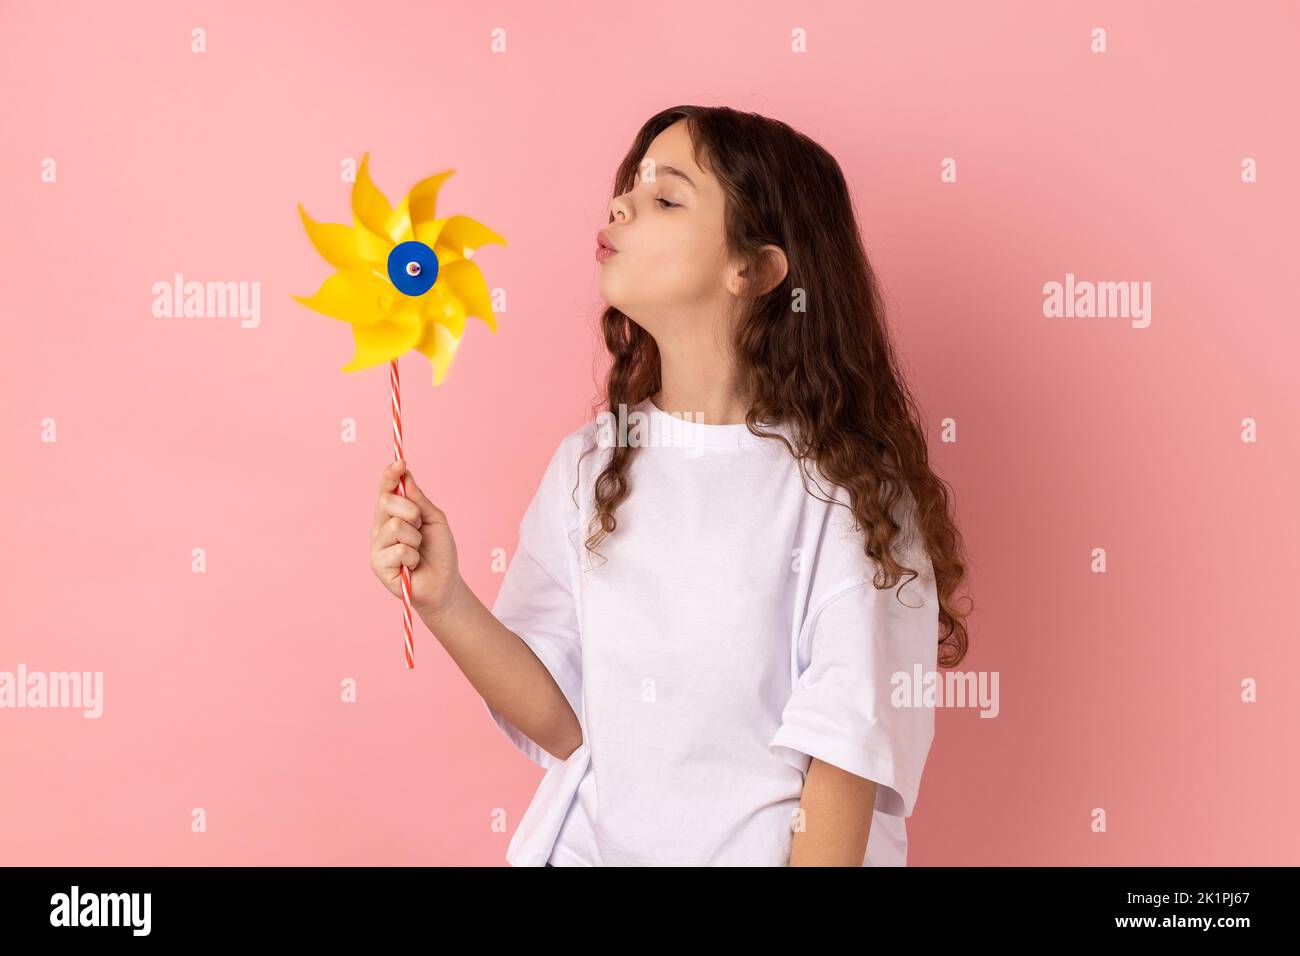 Portrait of charming cute playful little girl wearing white T-shirt blowing at paper windmill, playing with pinwheel toy on stick. Indoor studio shot isolated on pink background. Stock Photo